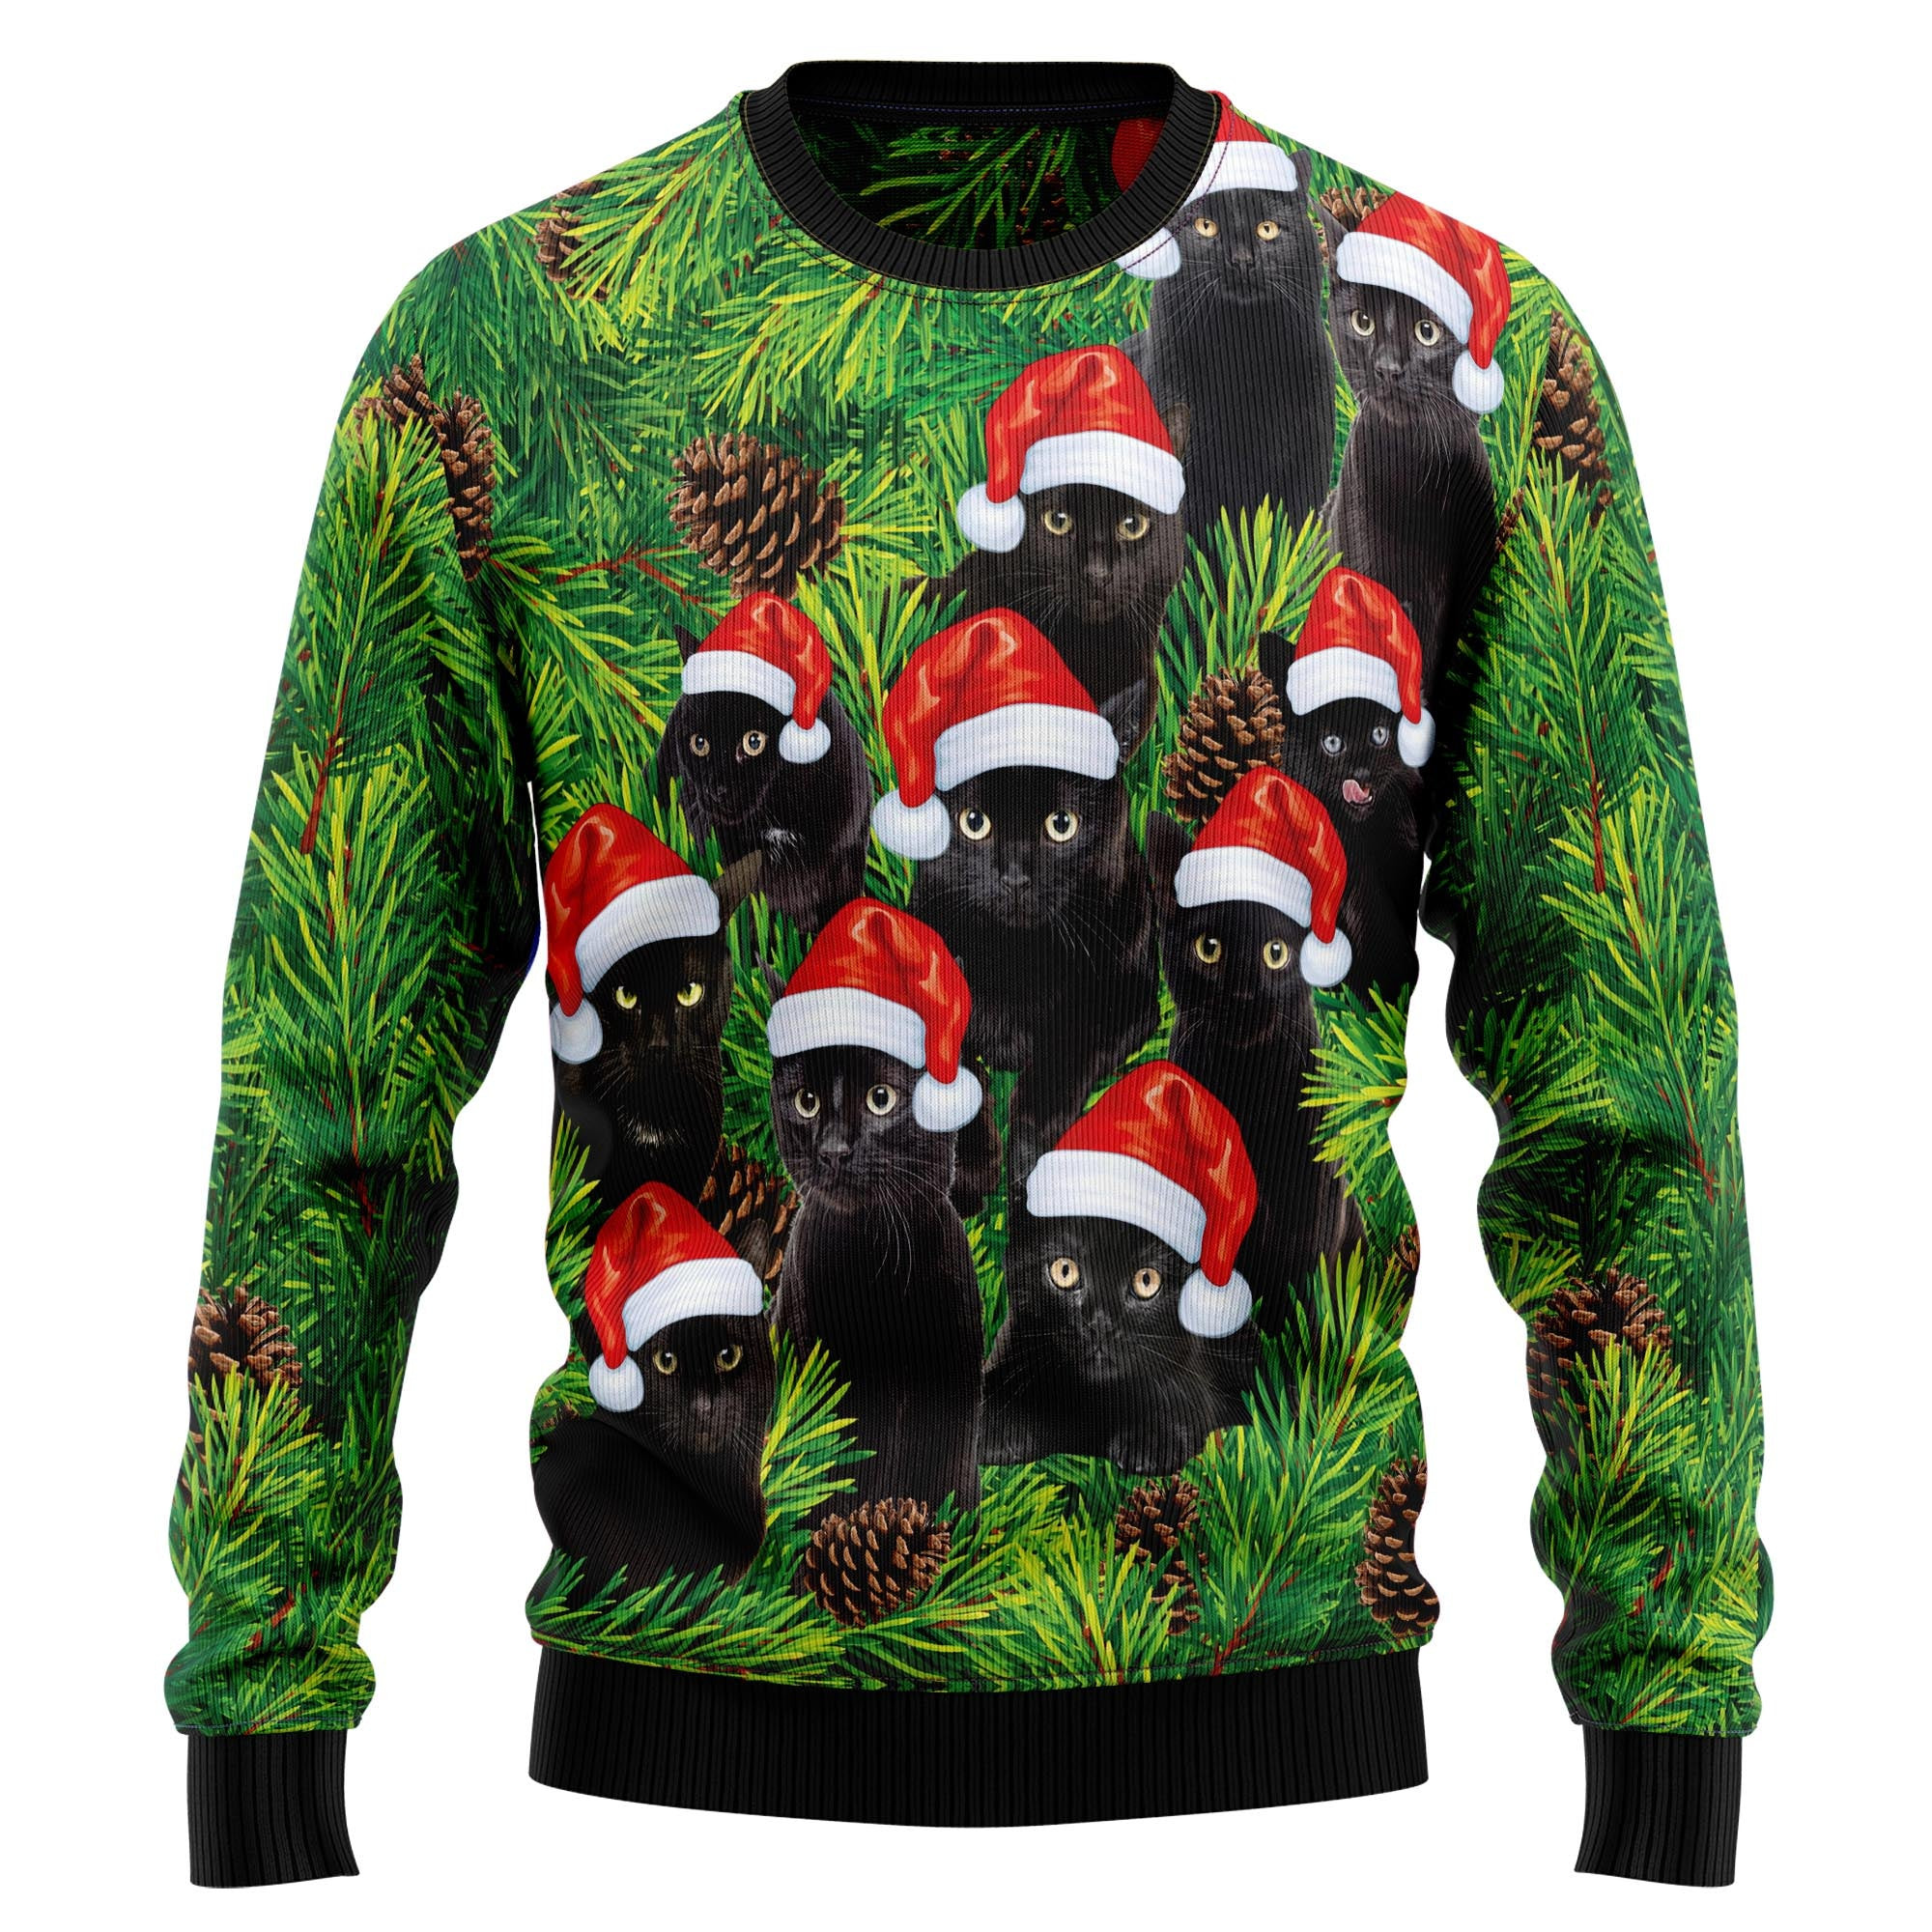 Black Cat Christmas Tree Ugly Christmas Sweater, Ugly Sweater For Men Women, Holiday Sweater